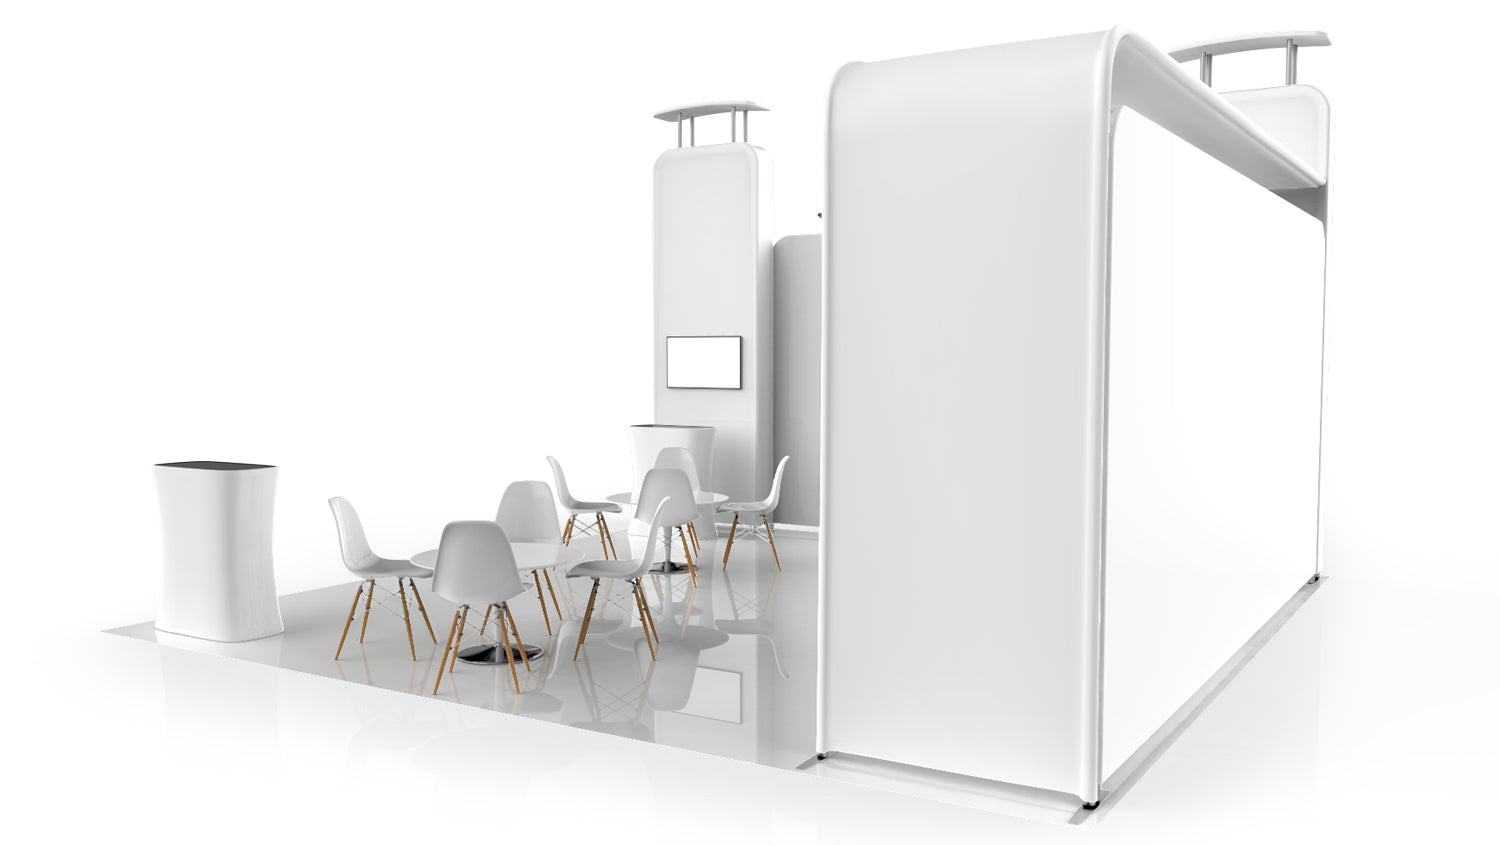 20x20 booth layout 3D model Pro-Package C right view